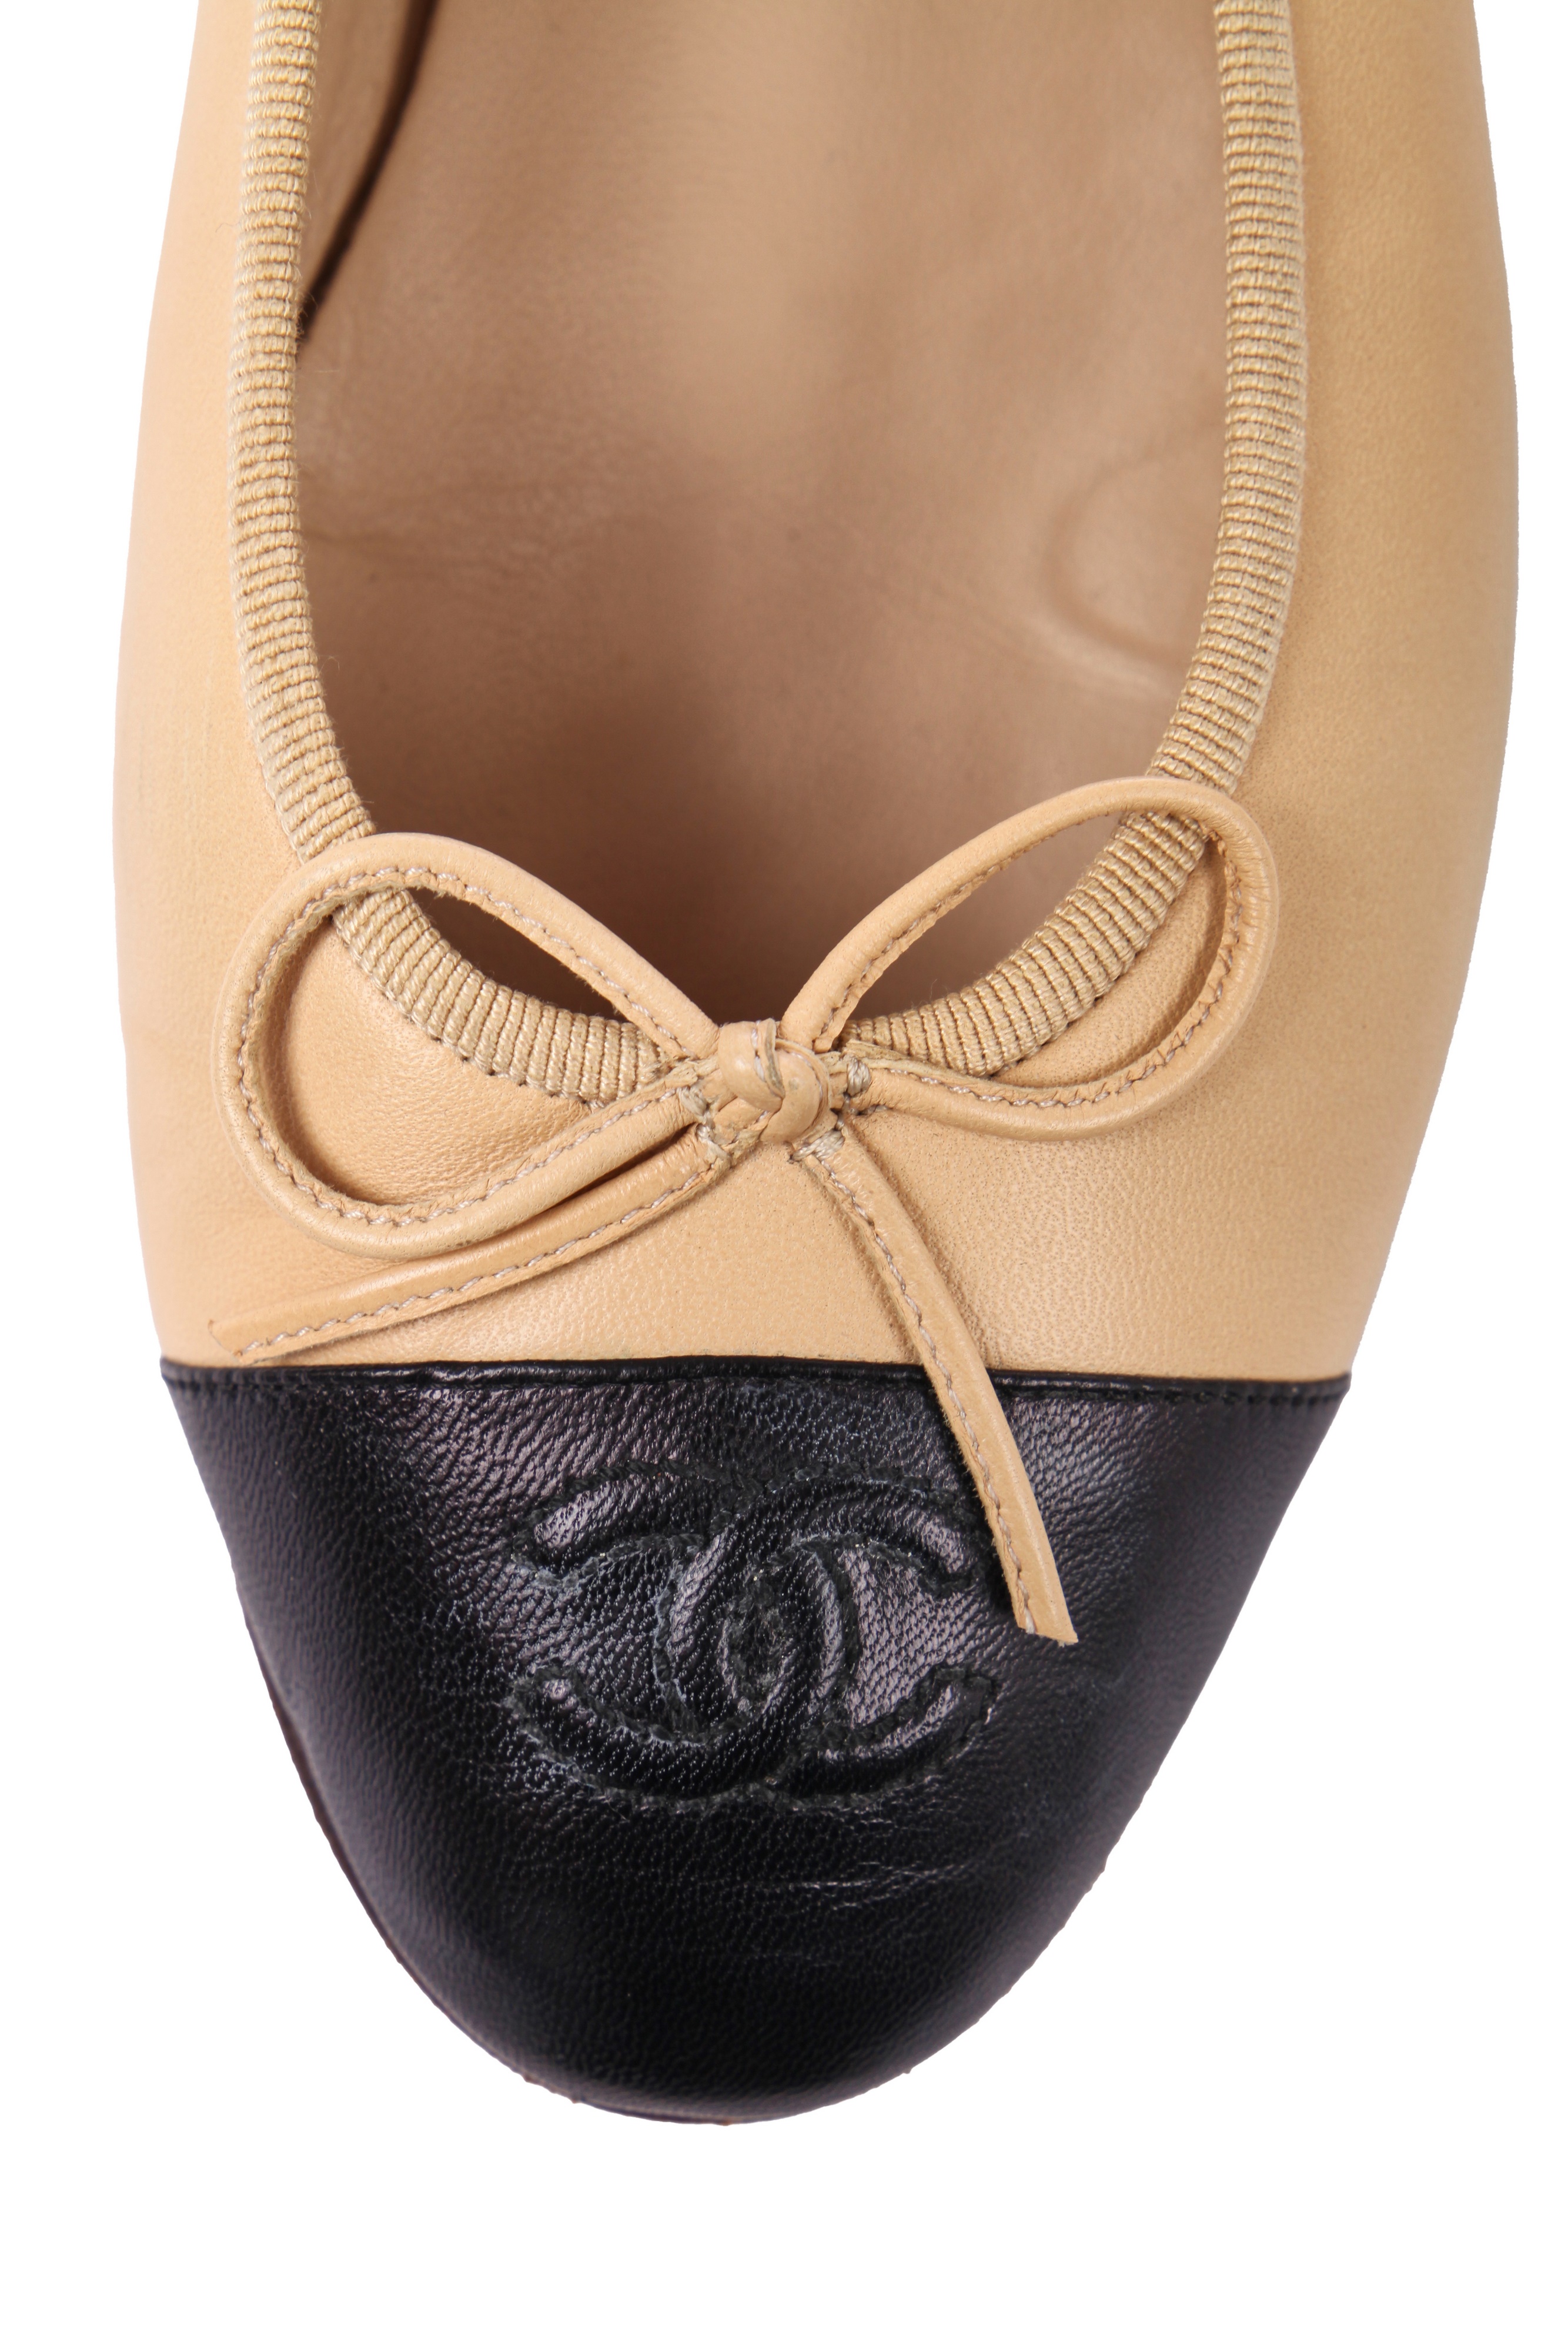 chanel suede ballet flats